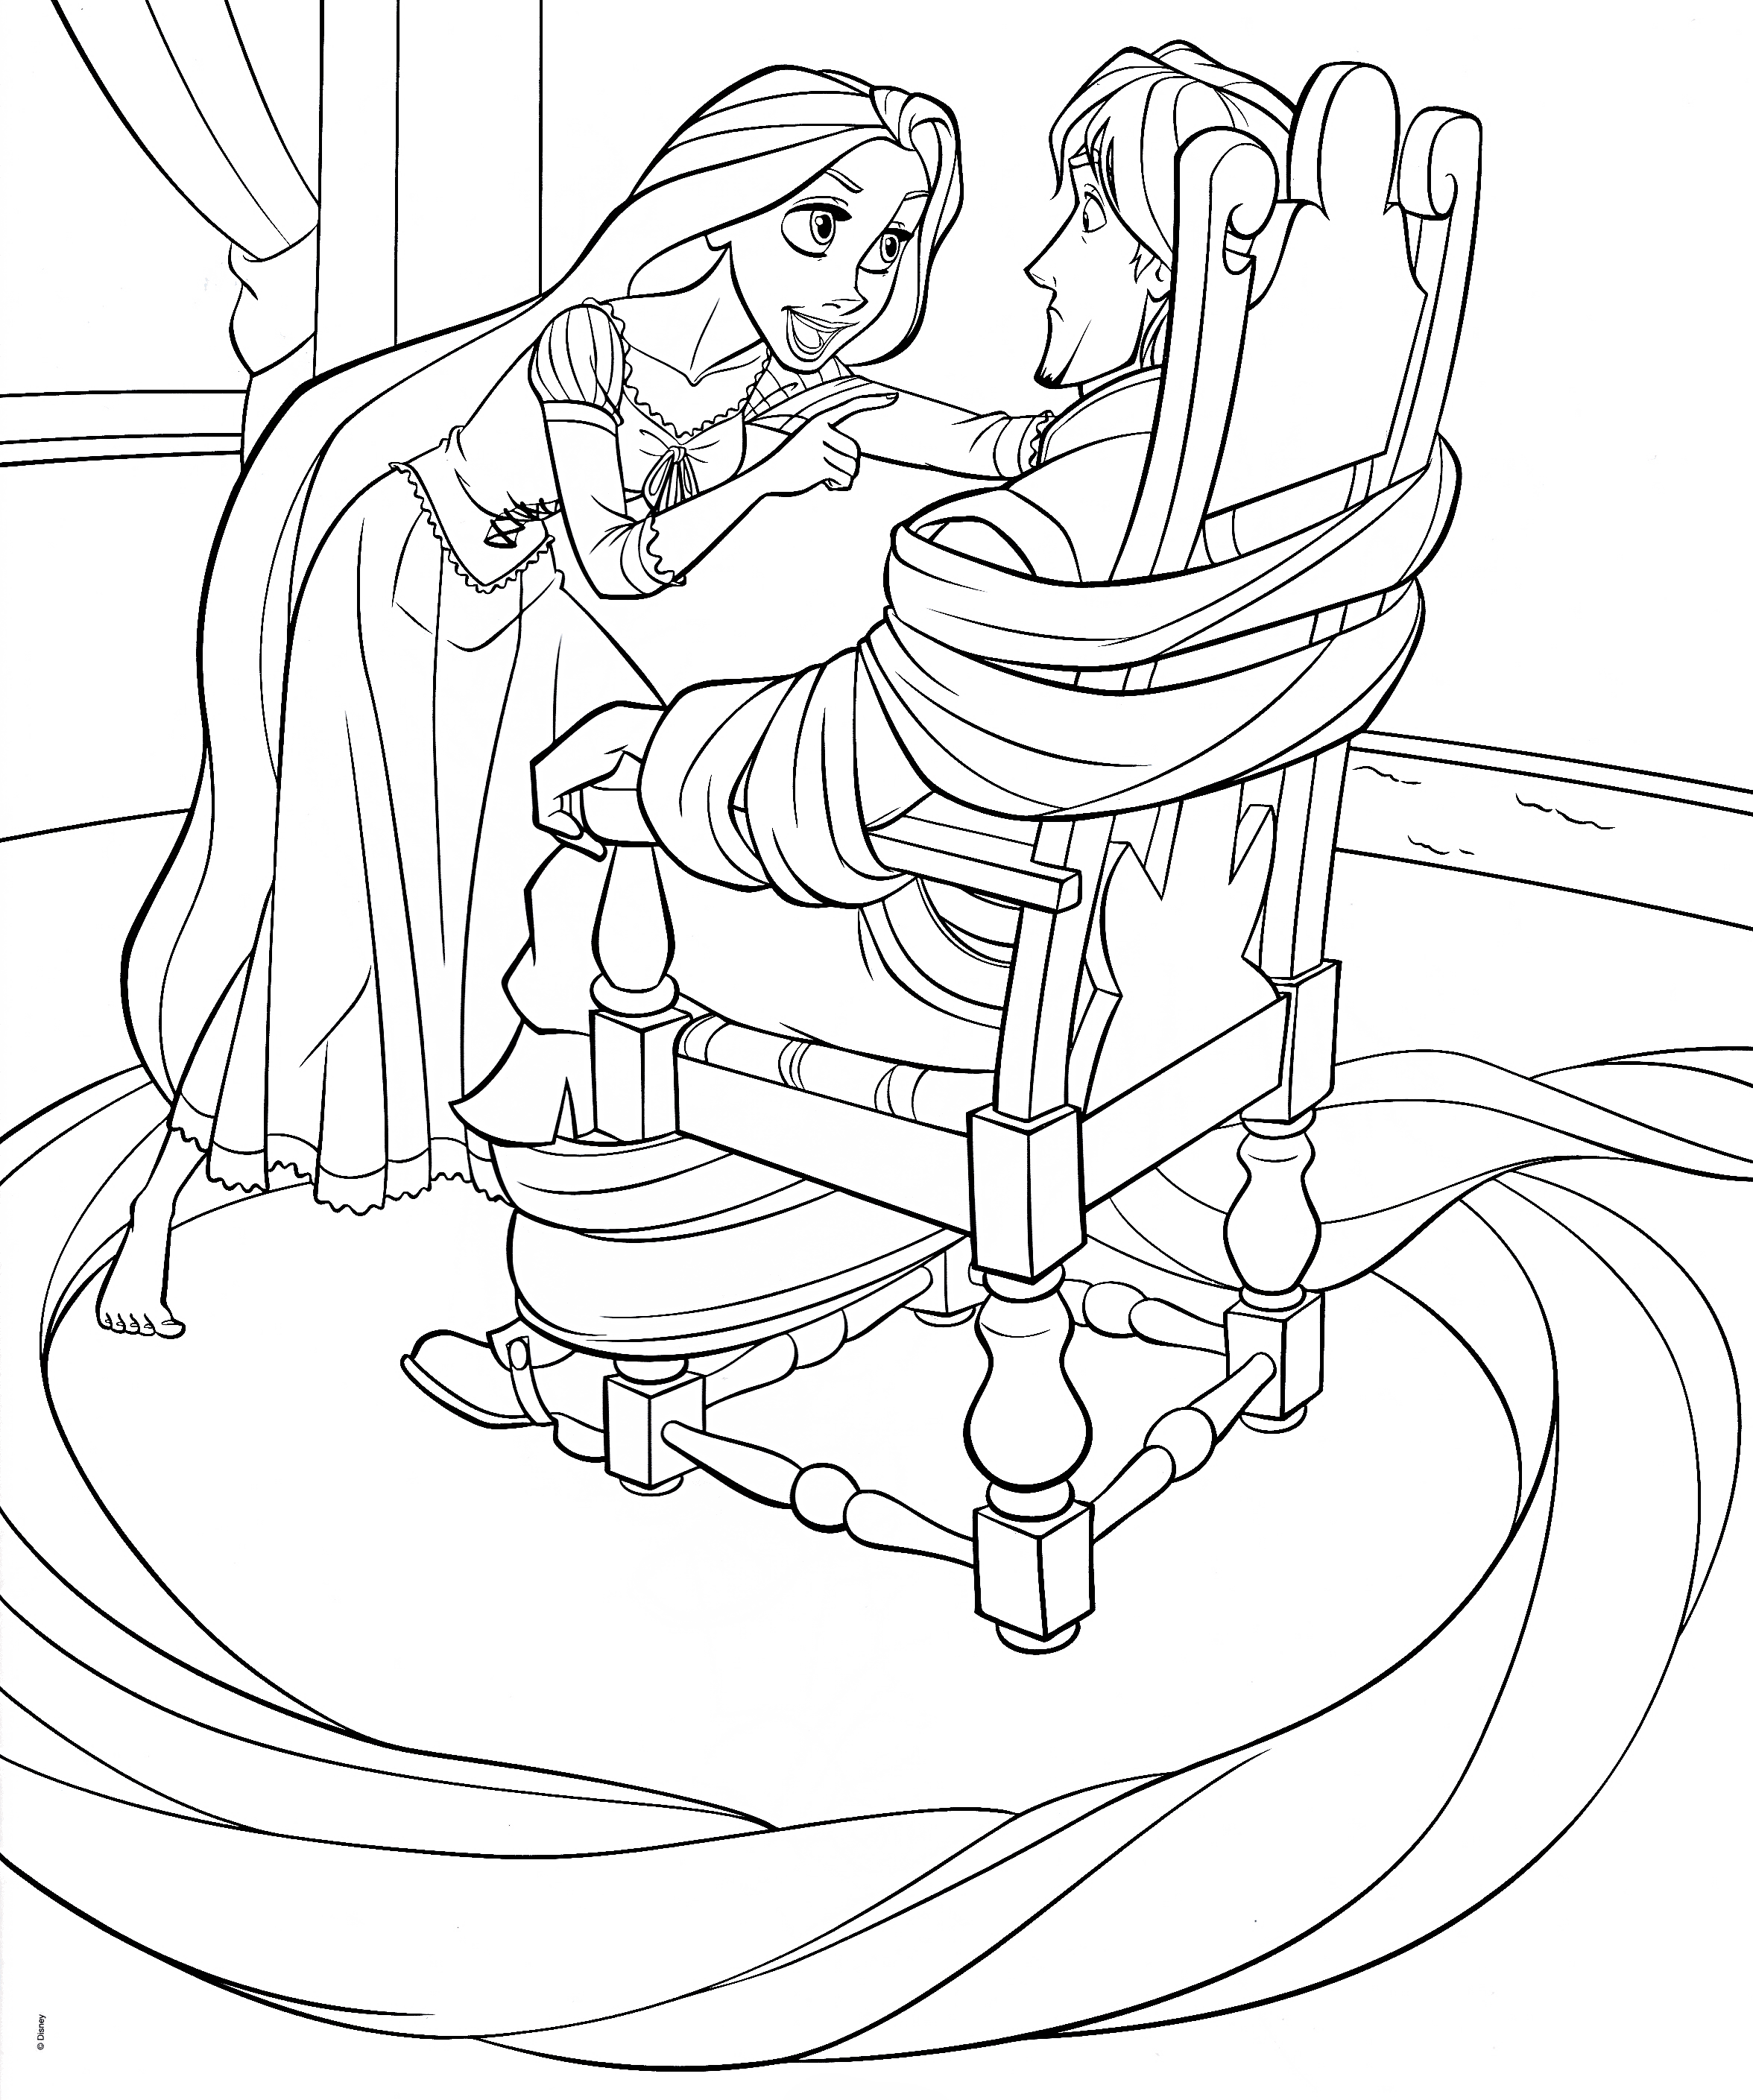 Rapunzel ties up Flynn Coloring Page